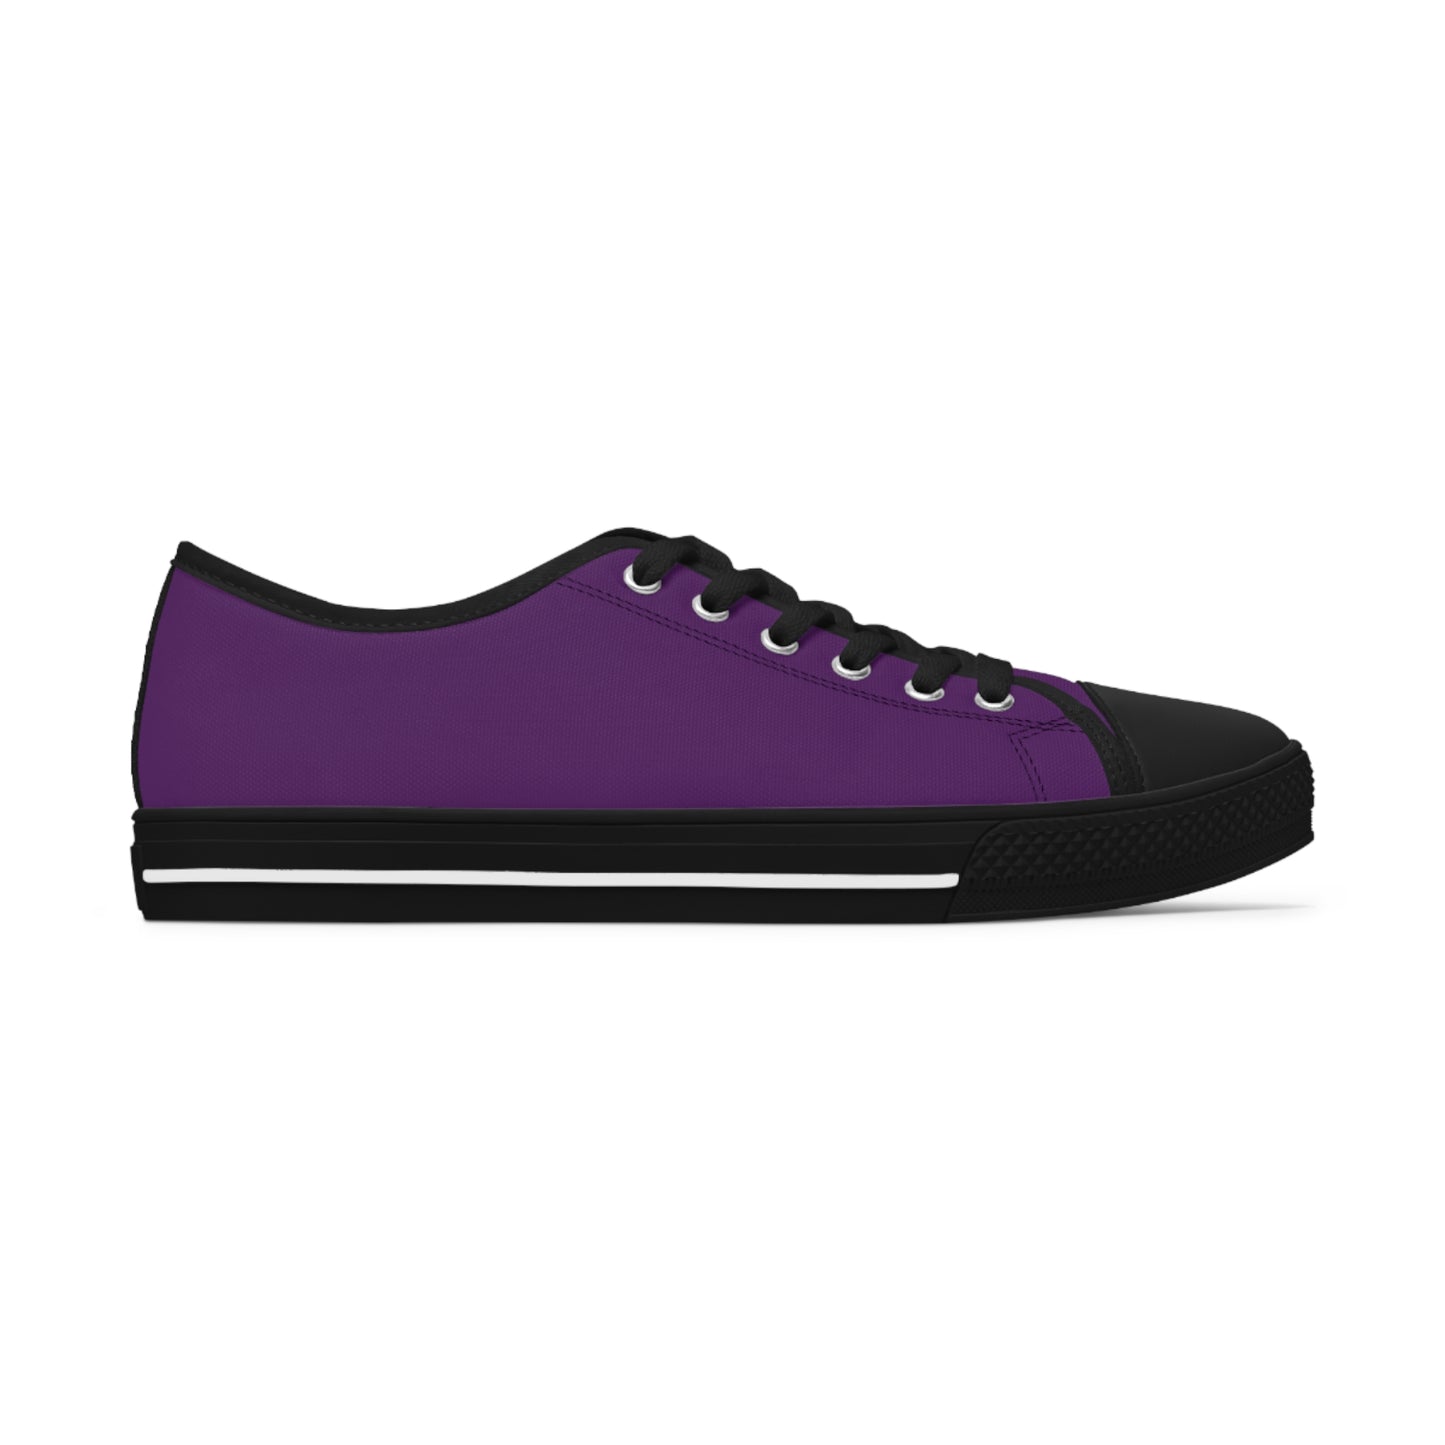 Women's Canvas Low Top Solid Color Sneakers - Royal Purple US 12 White sole